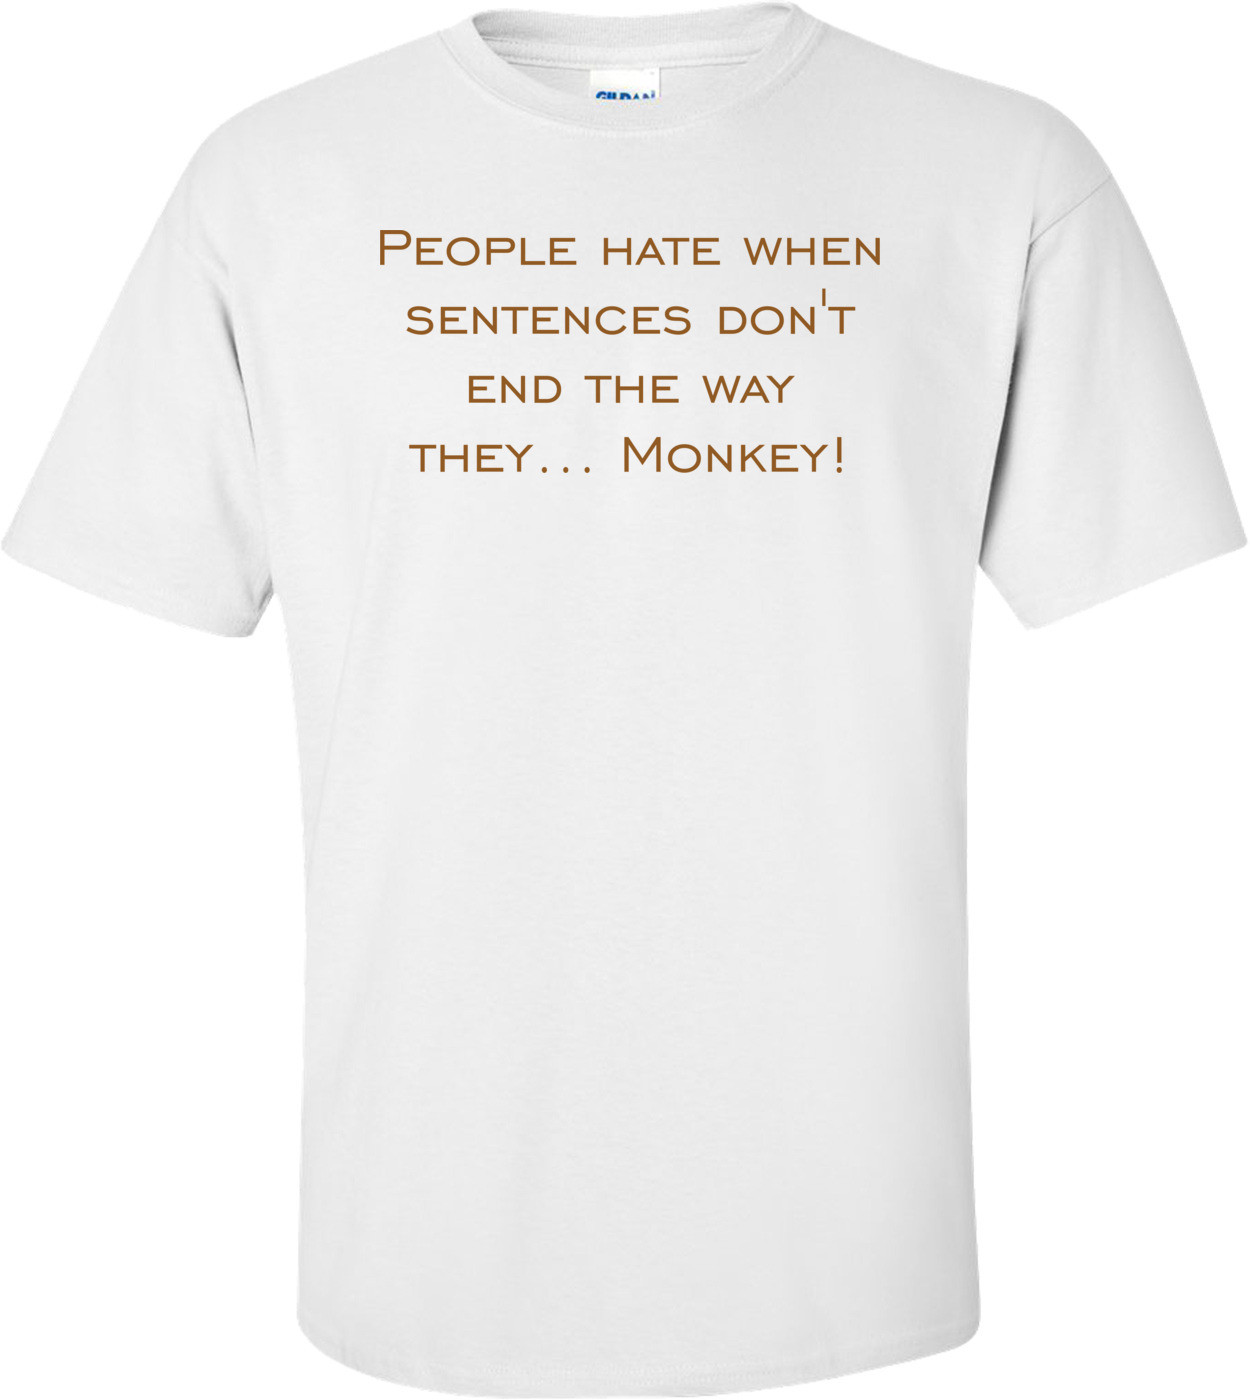 People hate when sentences don't end the way they... Monkey! Shirt